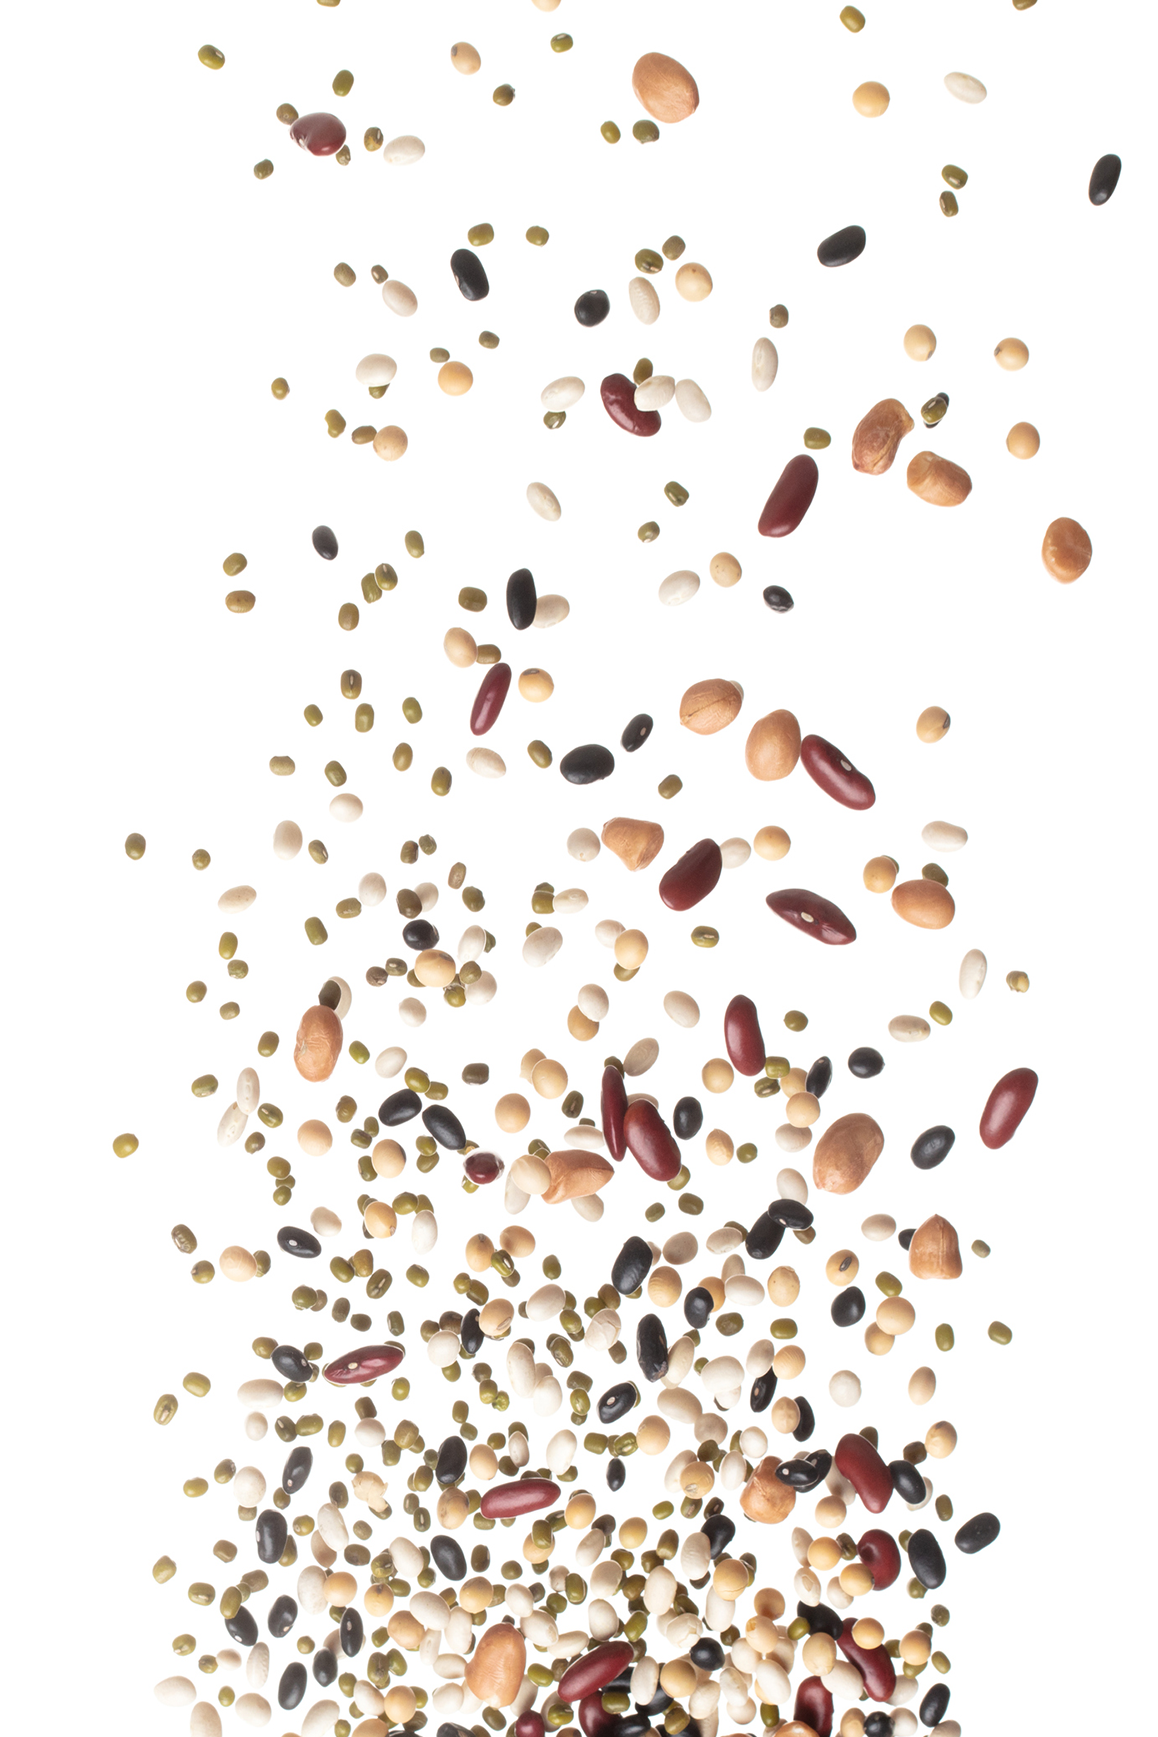 Seeds, Nuts and Legumes